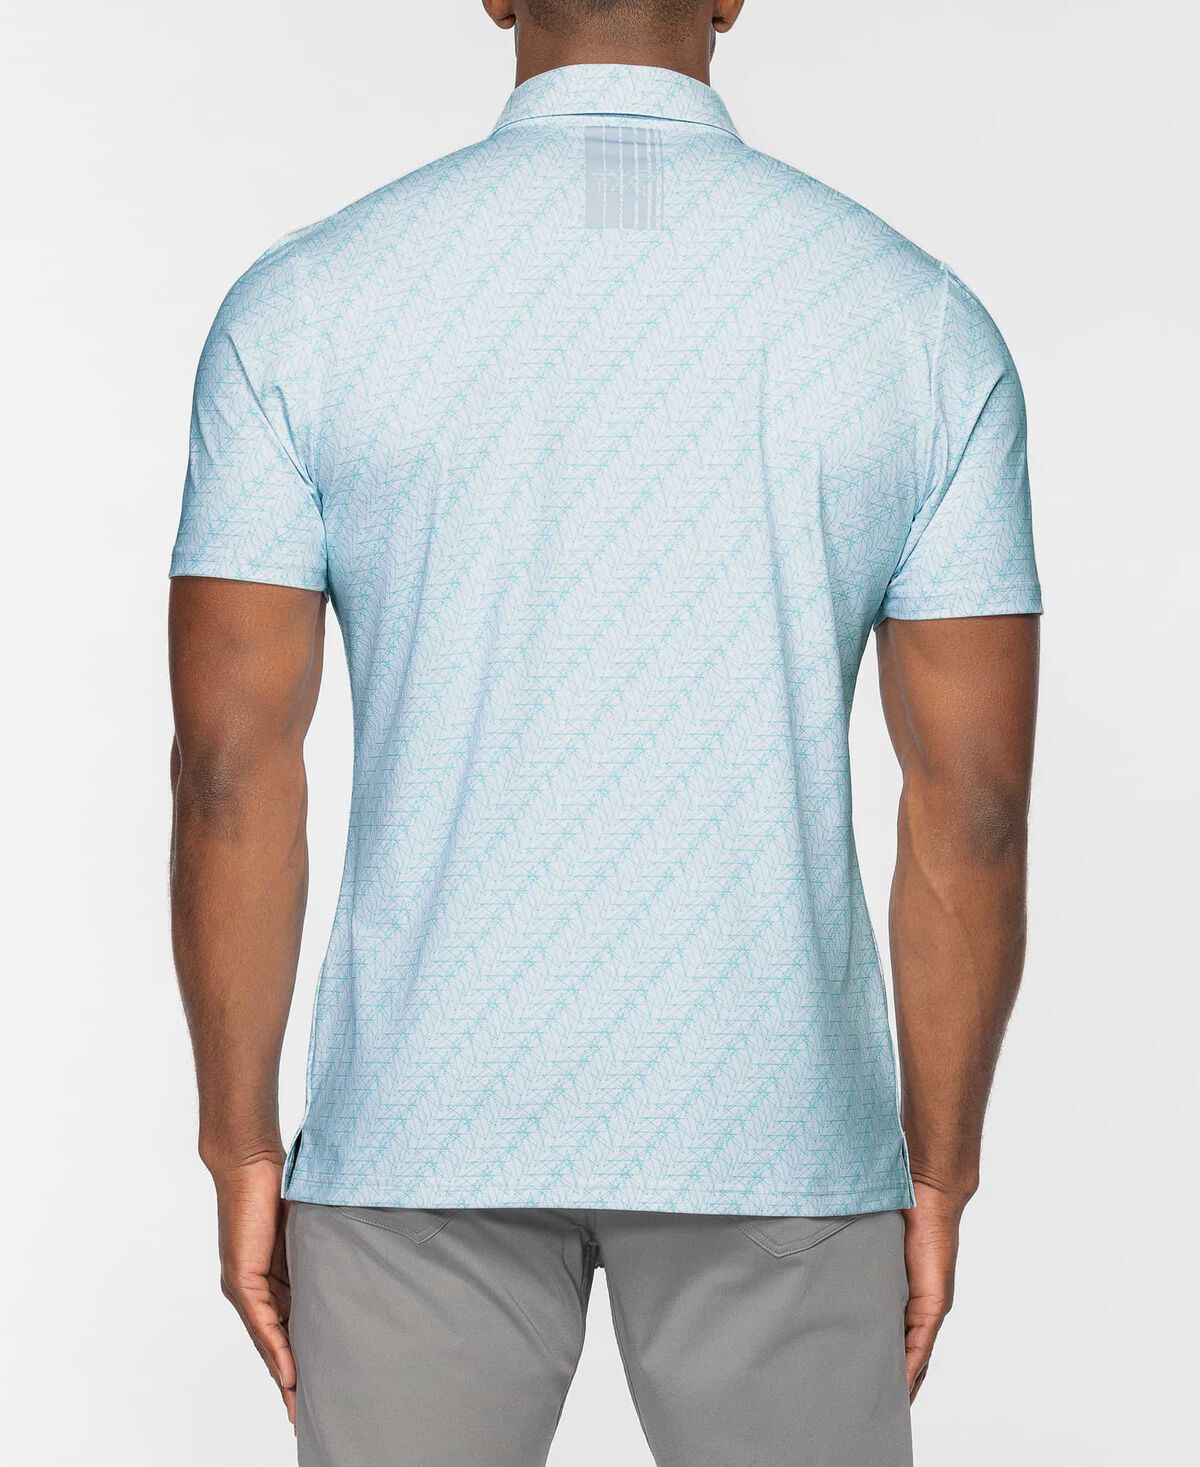 Men's Athletic Fit Galaxy Print Polo 